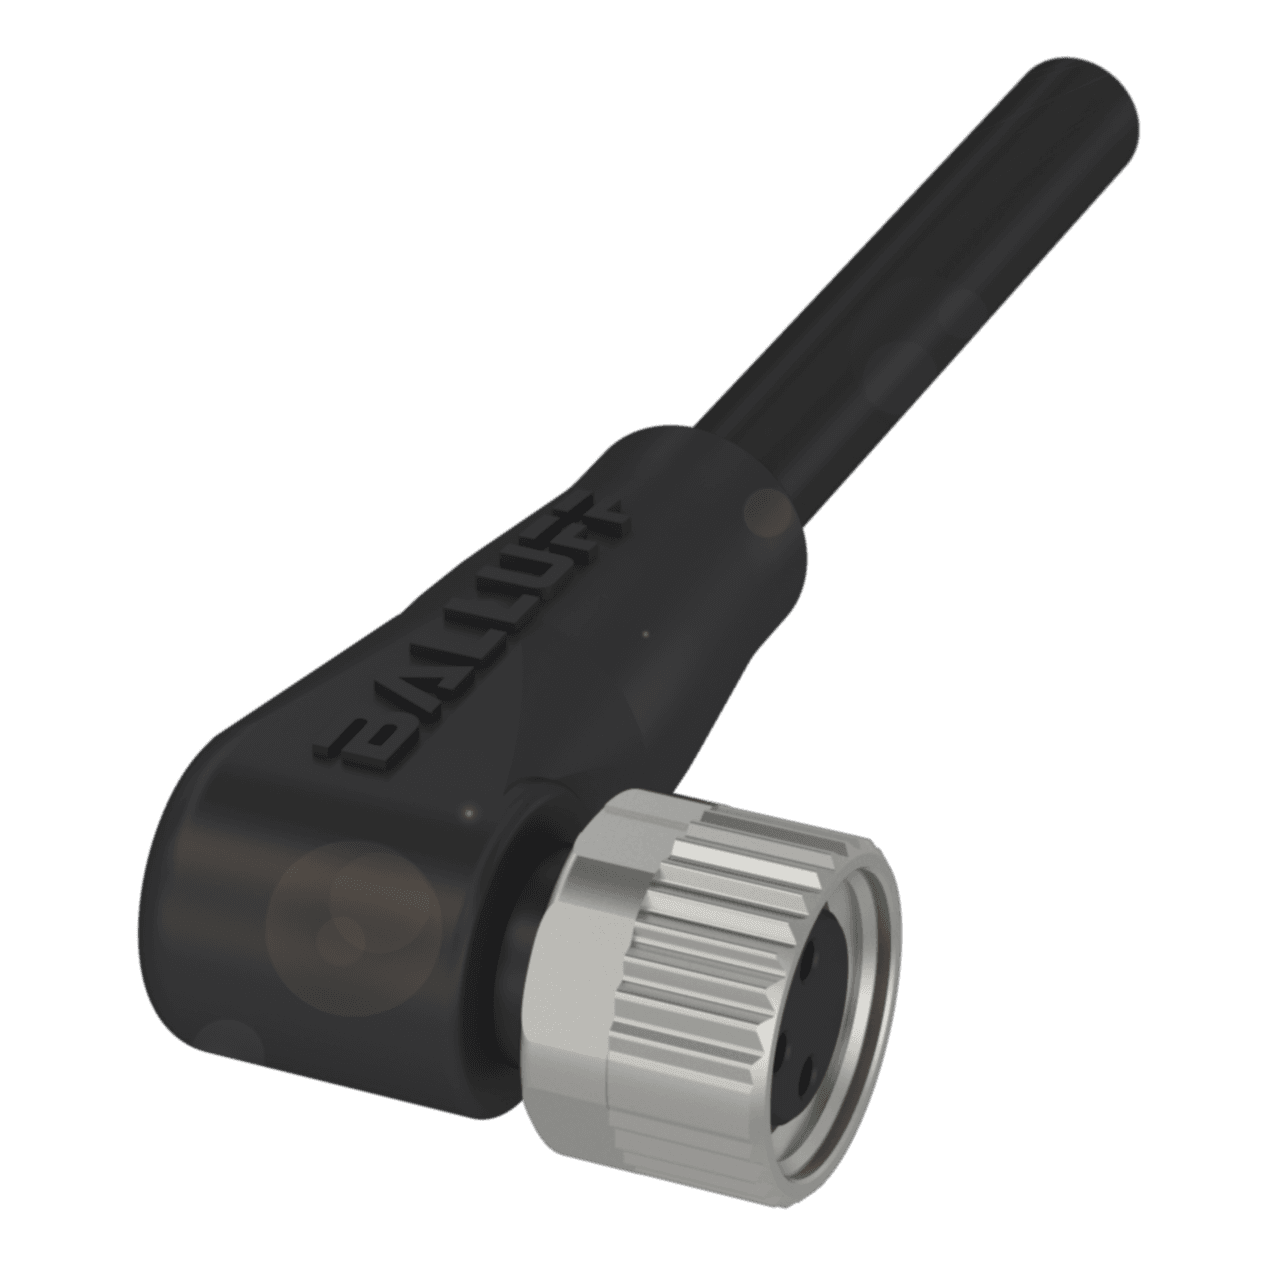 Balluff BCC02MM Connection: M8x1-Female, right-angle, 3-pin, A-coded, Cable: PUR black, 5.00 m, Drag chain compatible, Number of conductors: 3, Conductor cross-section: 0.34 mm², Cable temperature, fixed routing: -50...90 °C, Cable temperature, flexible routing: -25...90